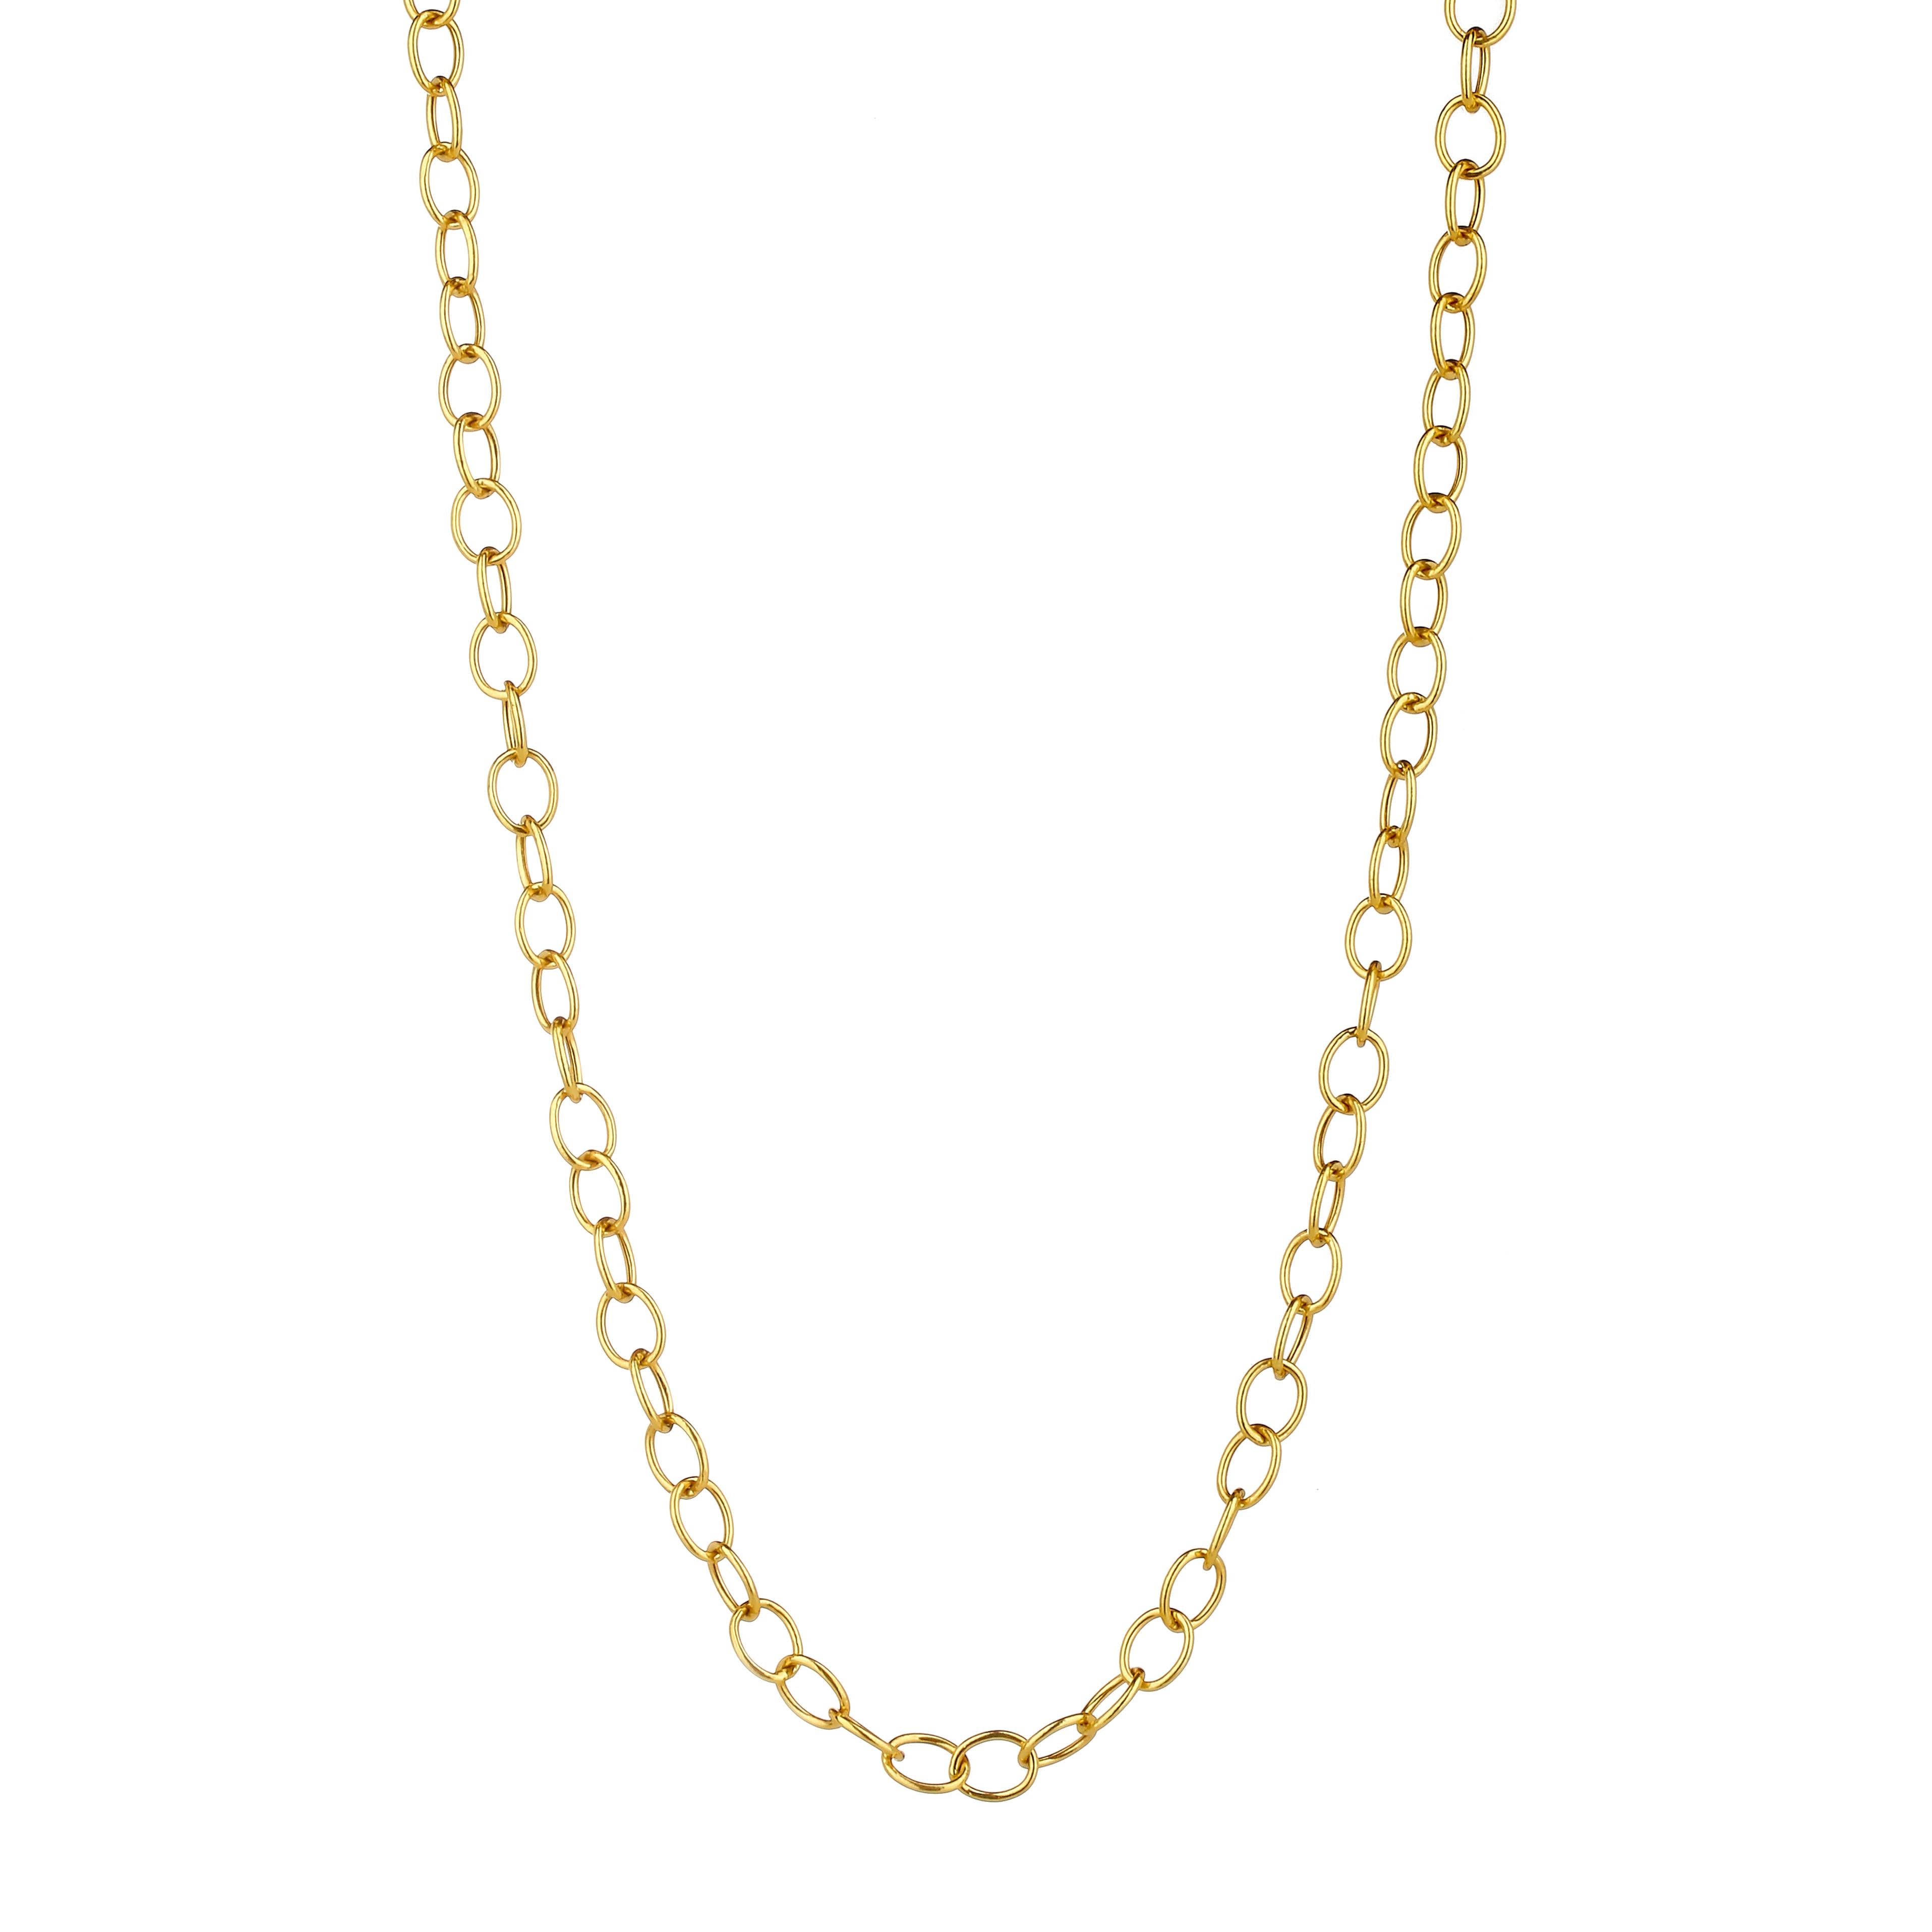 Created in 18 karat yellow gold
30 inch length
Weight 12 grams approx.
18 karat yellow gold lobster clasp
Chain can be clasped at any length

Crafted in 18 karat yellow gold, this impressive chain is 30 inches in length and features a lobster clasp